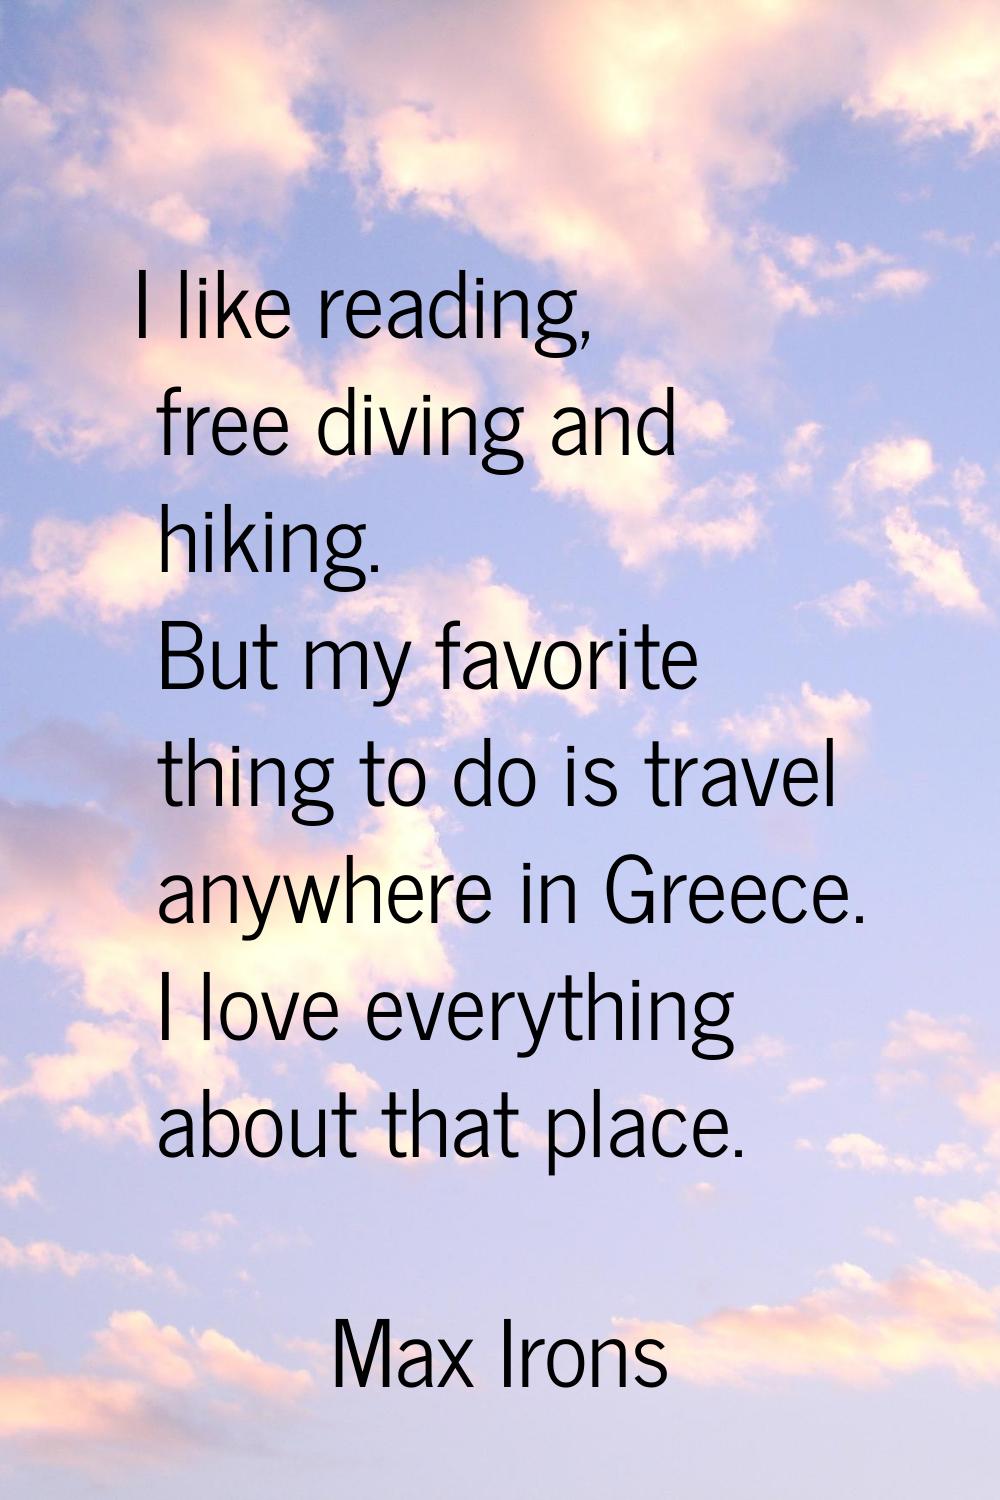 I like reading, free diving and hiking. But my favorite thing to do is travel anywhere in Greece. I